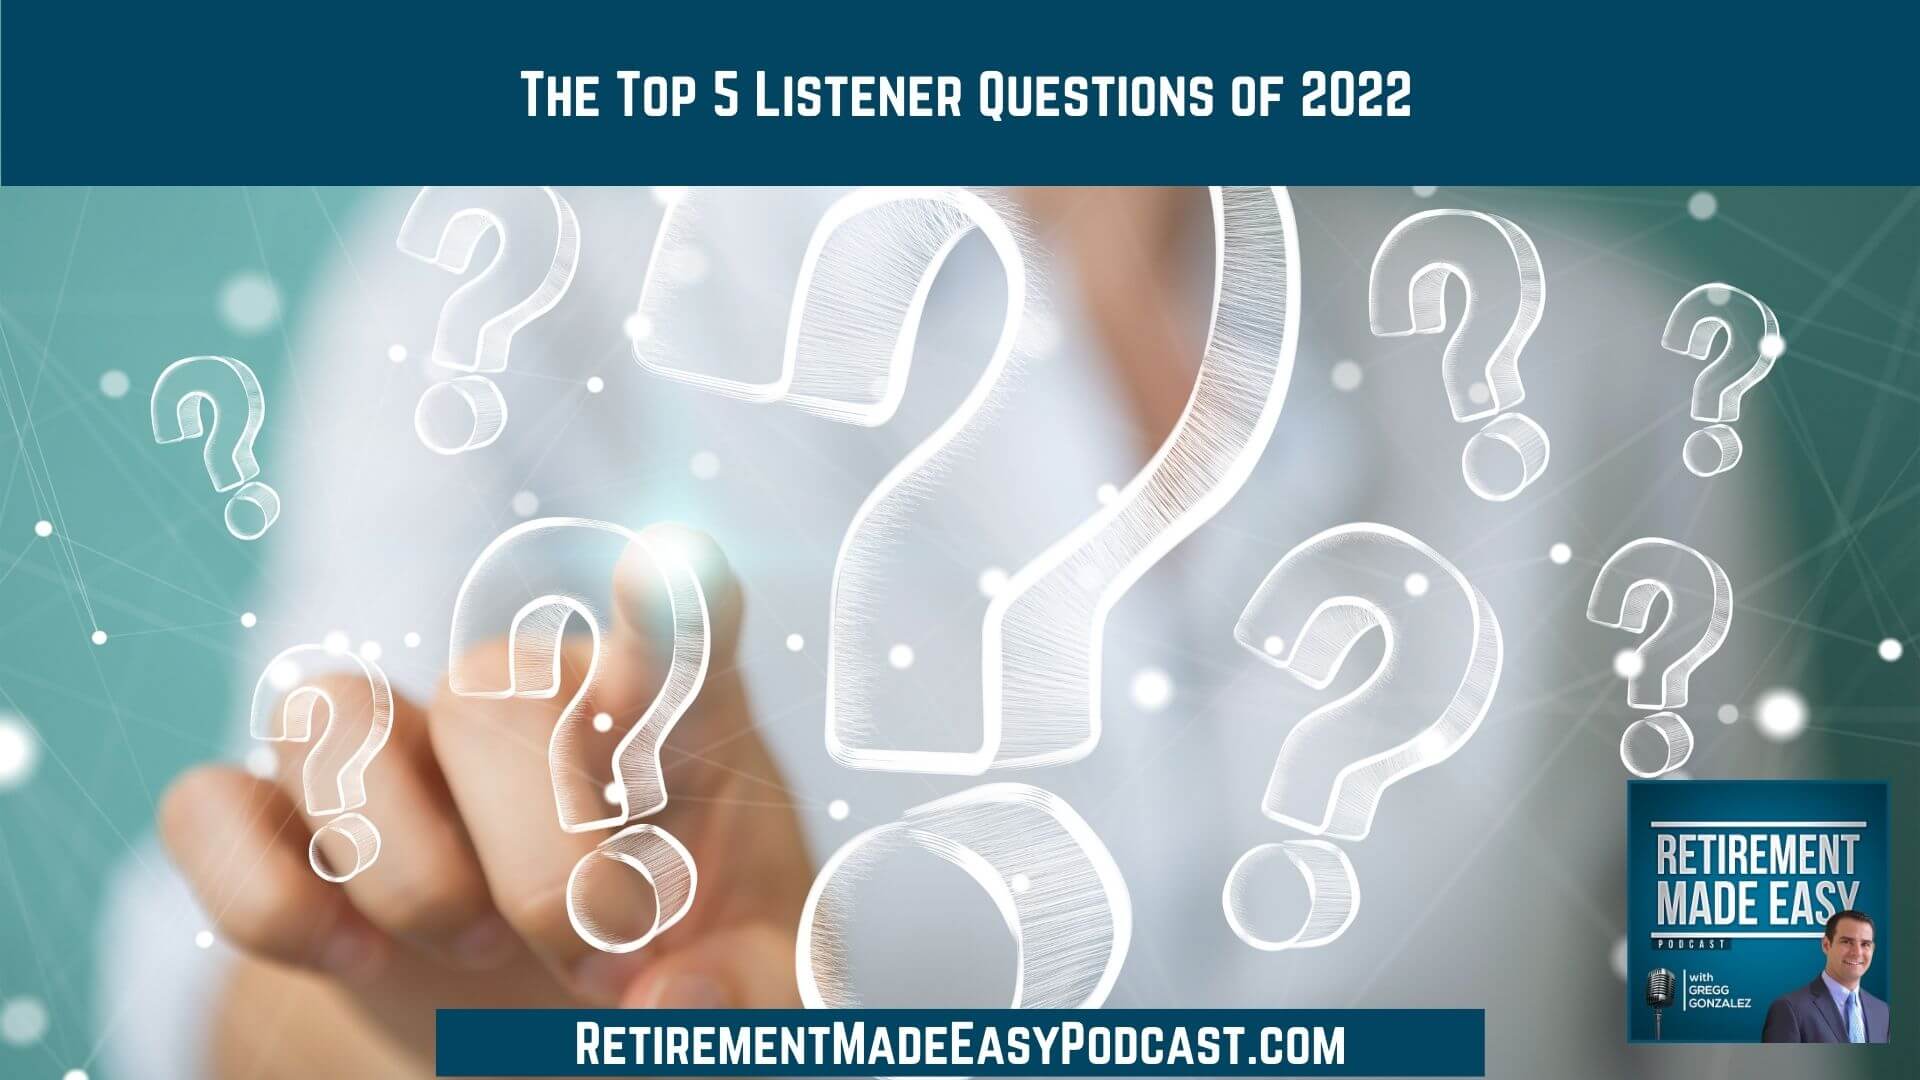 The top 5 listener questions of 2022